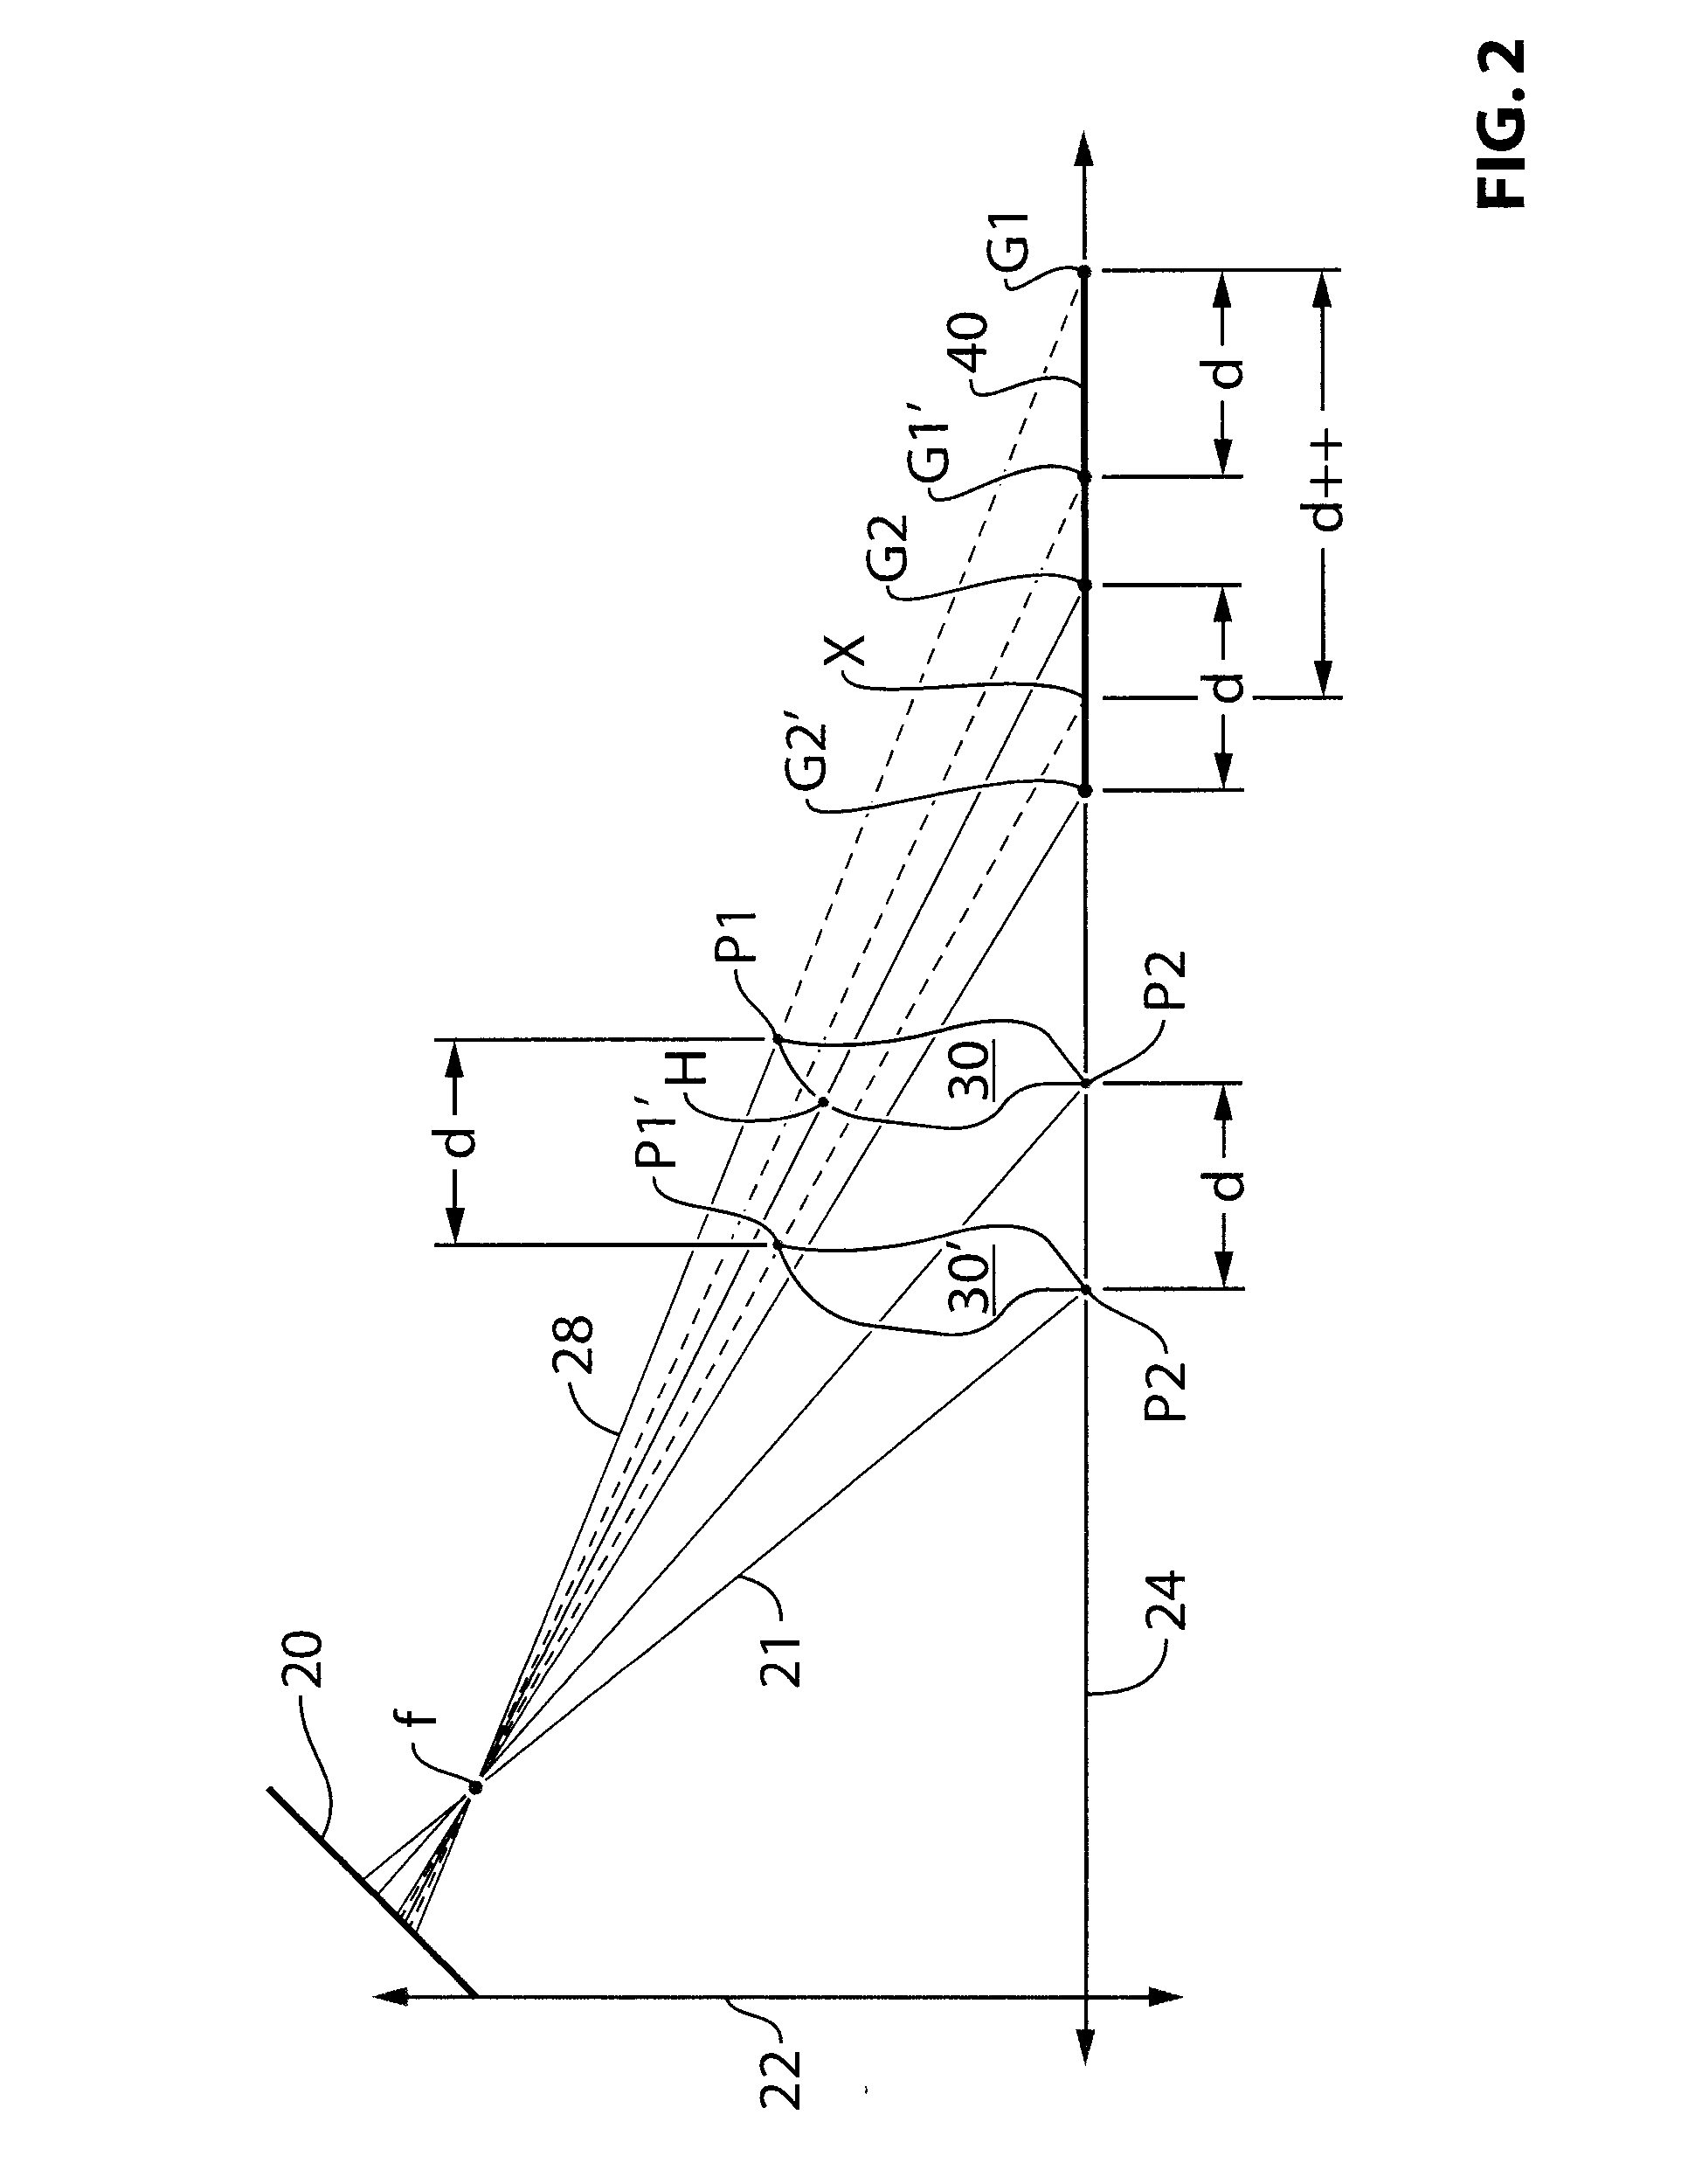 Image processing method for detecting objects using relative motion